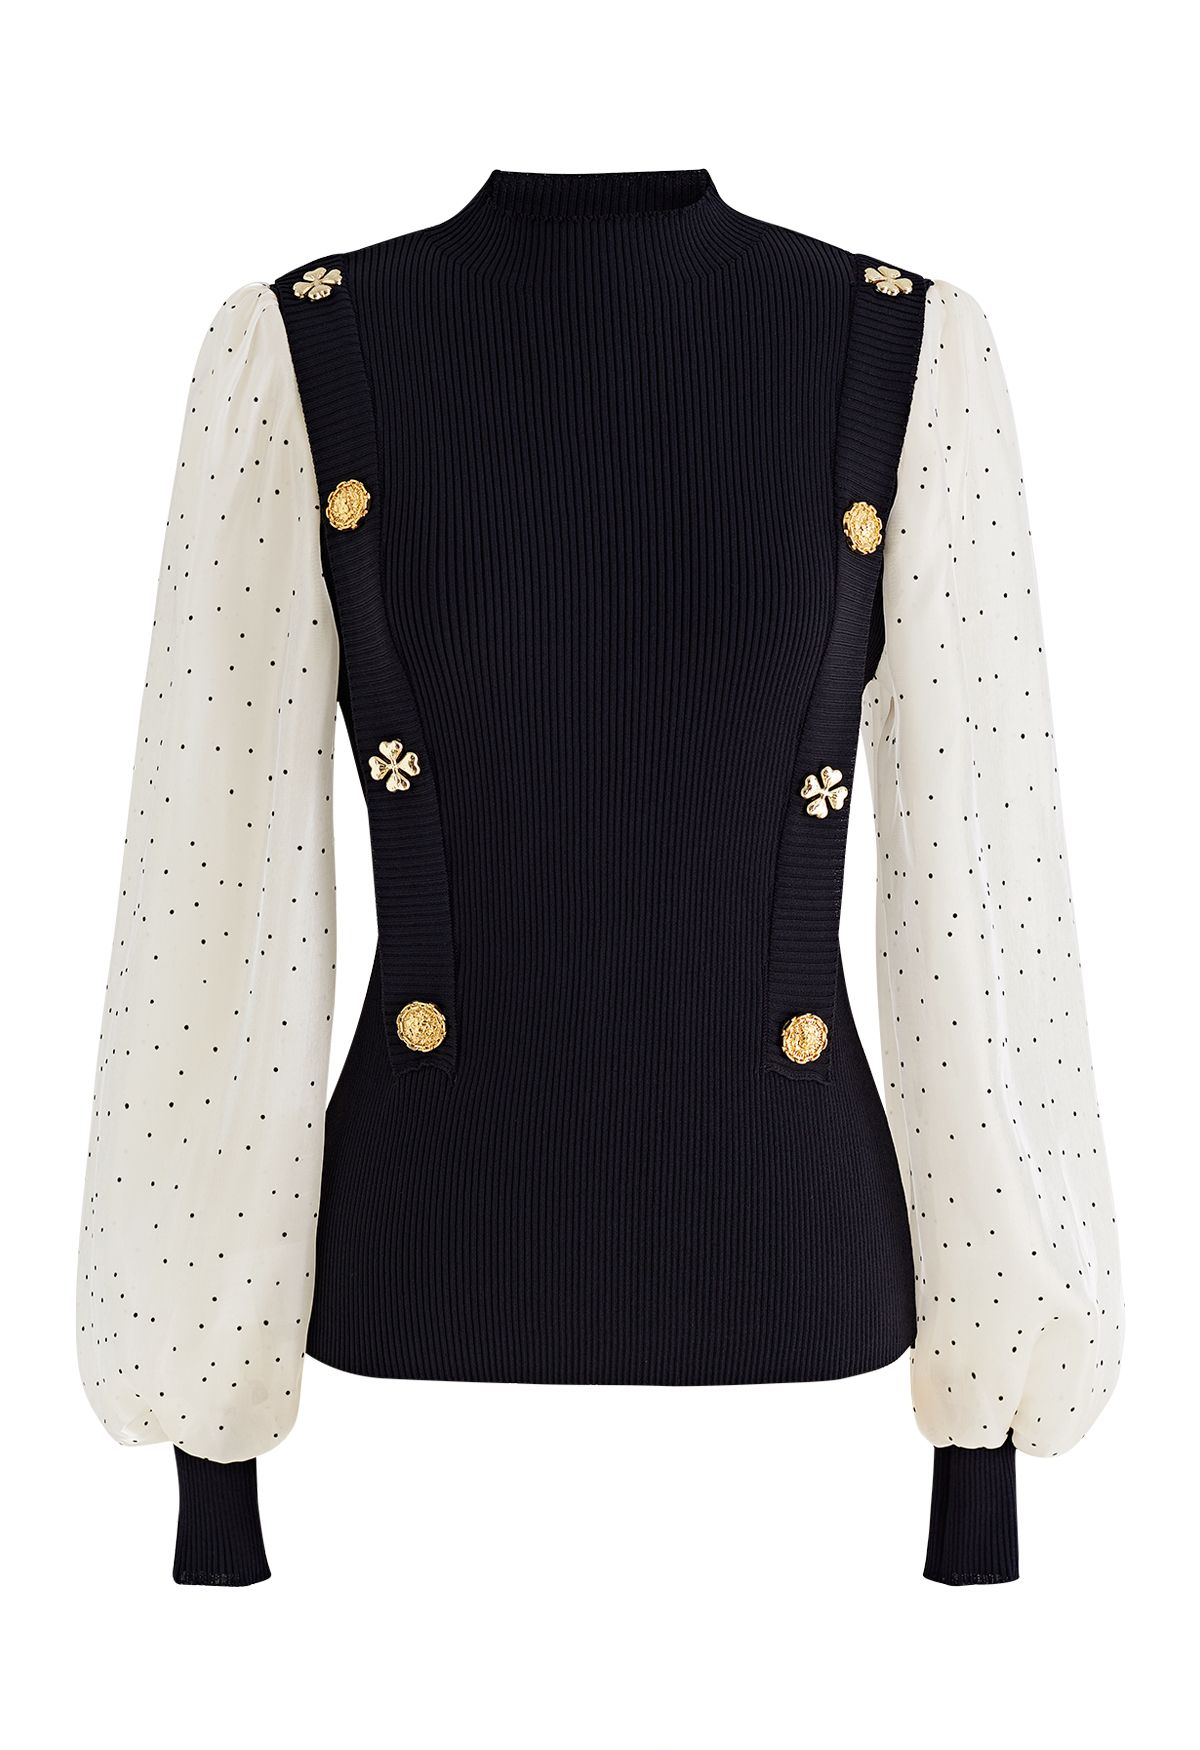 Spliced Dotted Sleeves Buttoned Knit Top in Black